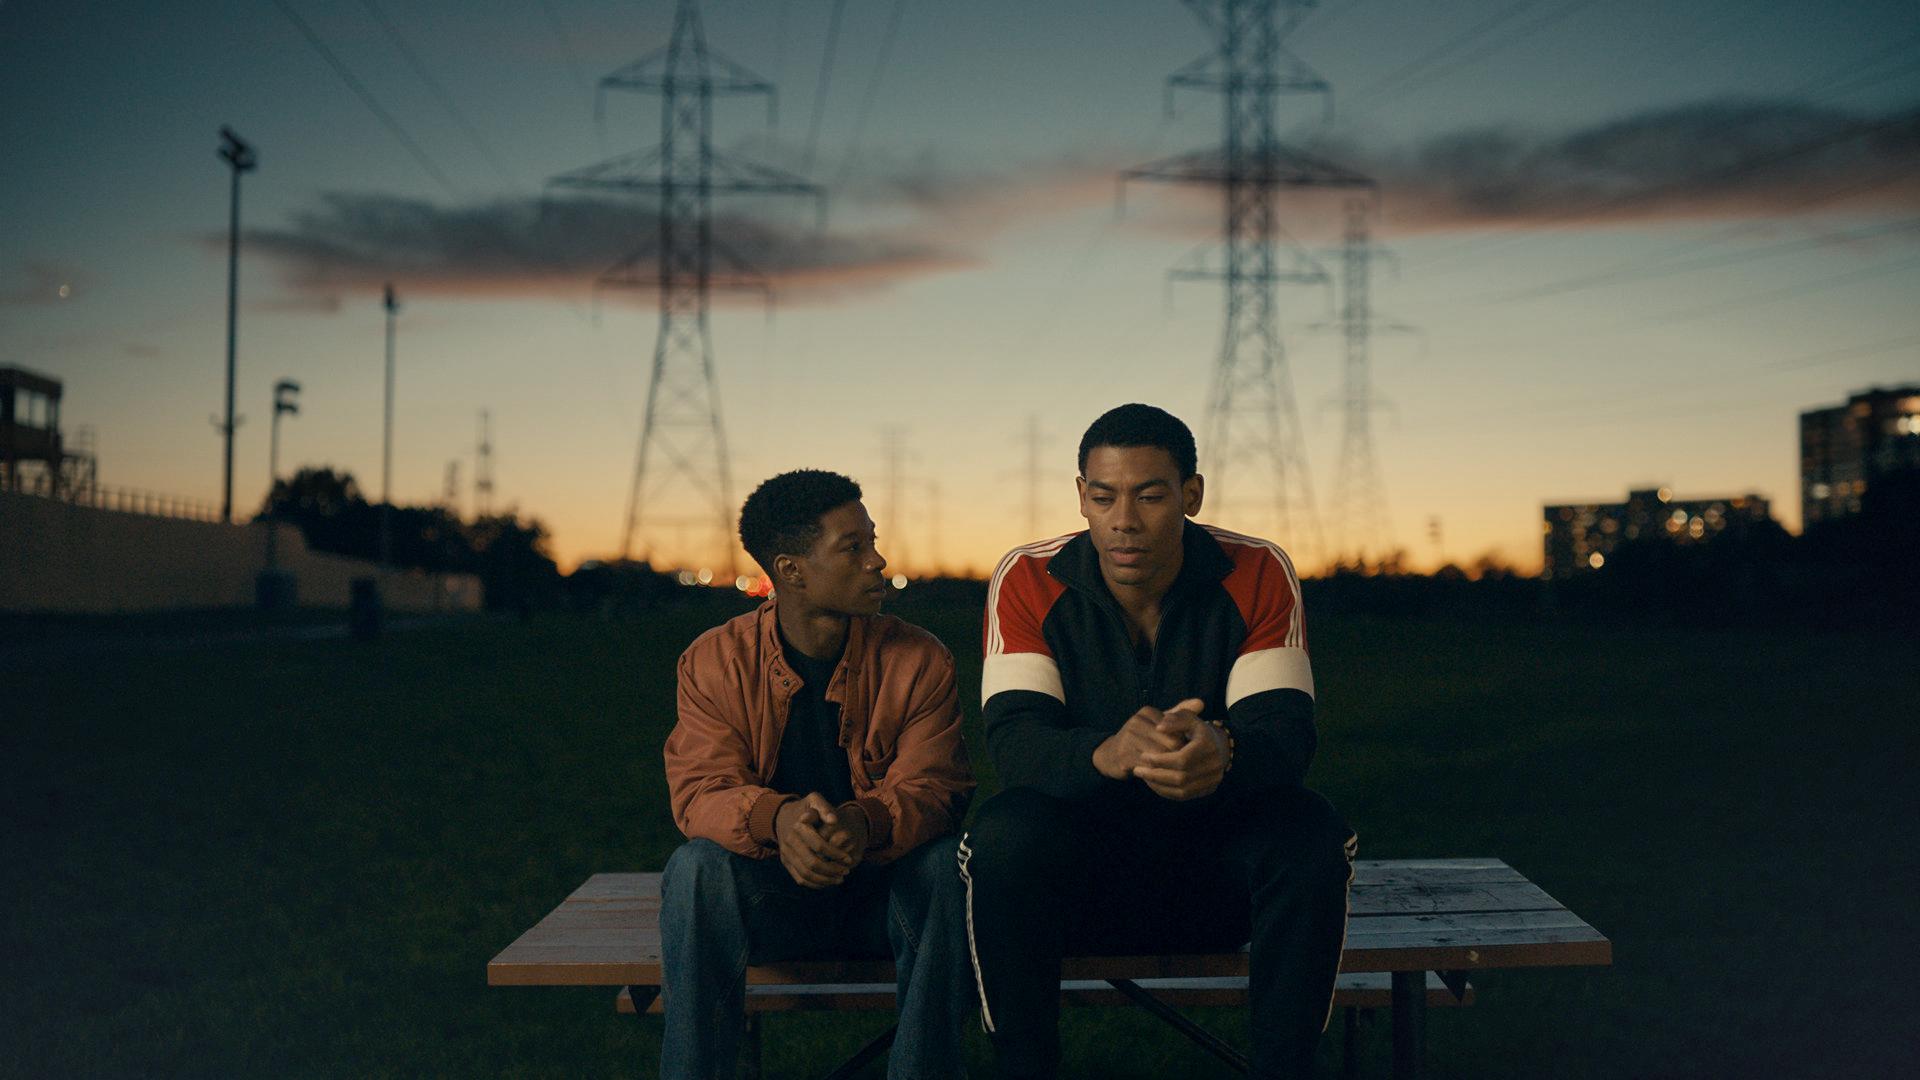 Two brothers, Black young men, sit on a bench outside in front of power lines. The sun is setting and the sky is tinted orange.